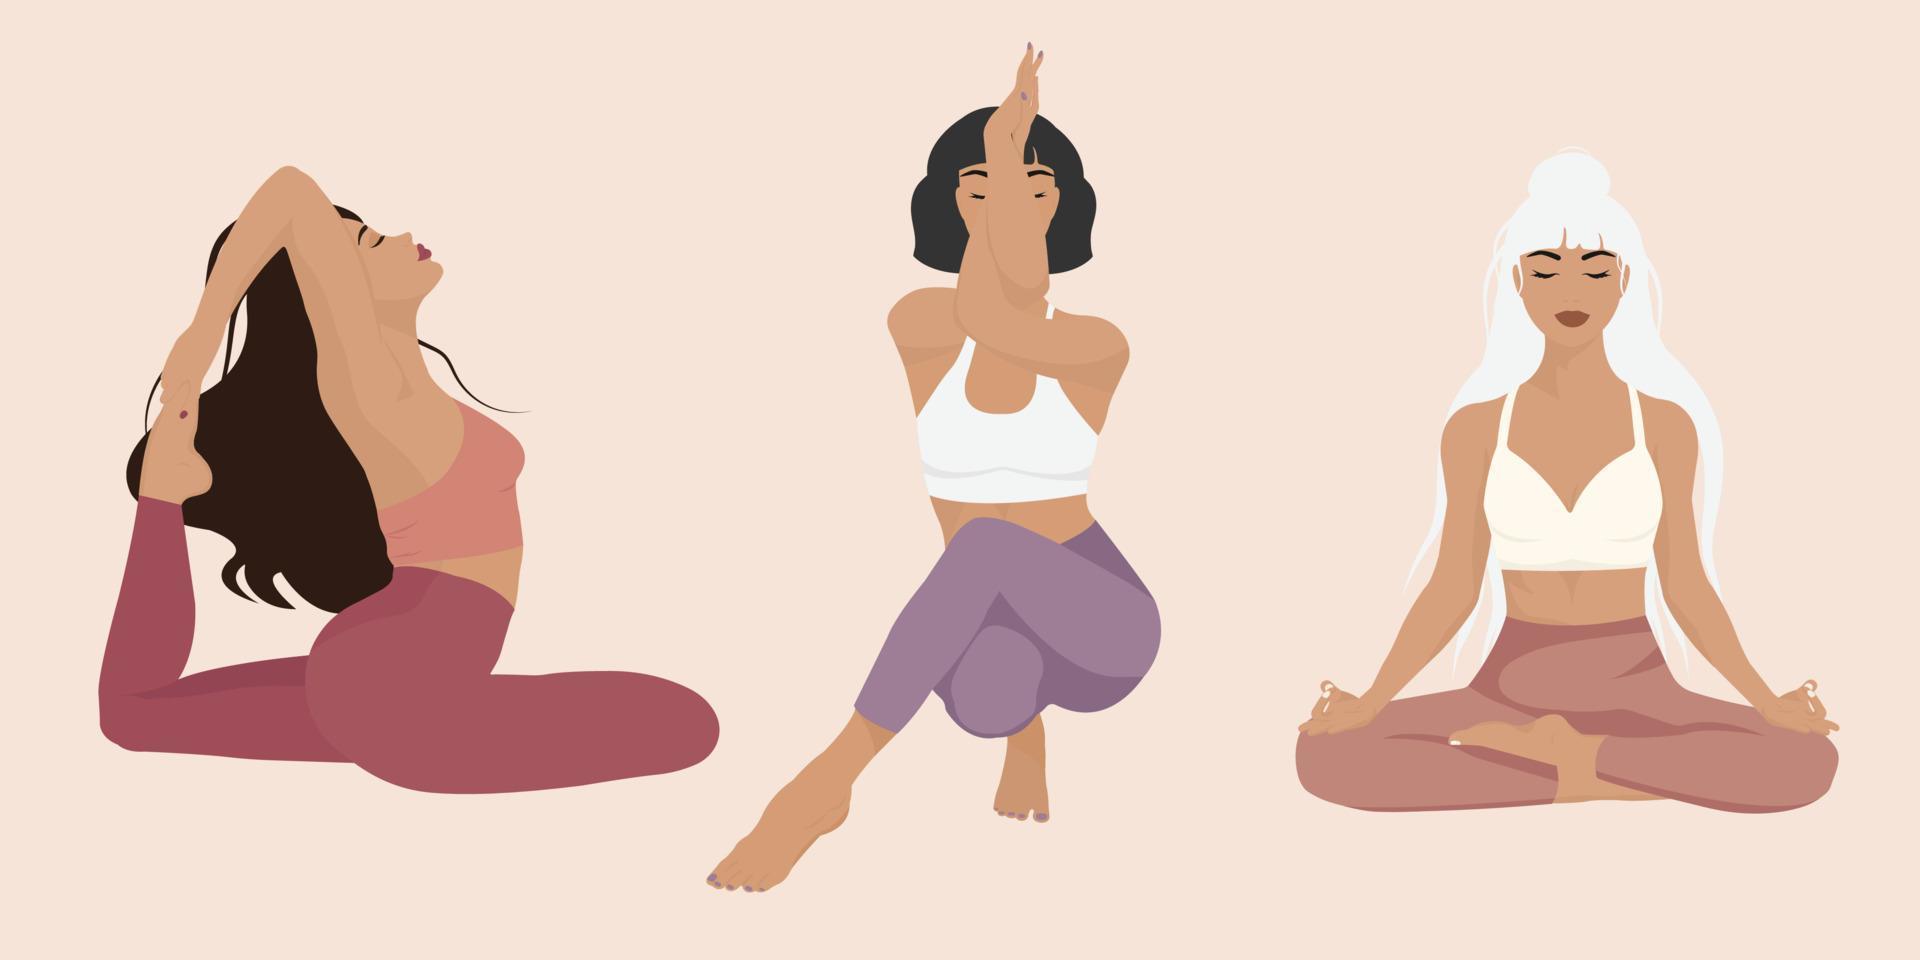 Set of girls in different yoga poses on a simple background vector